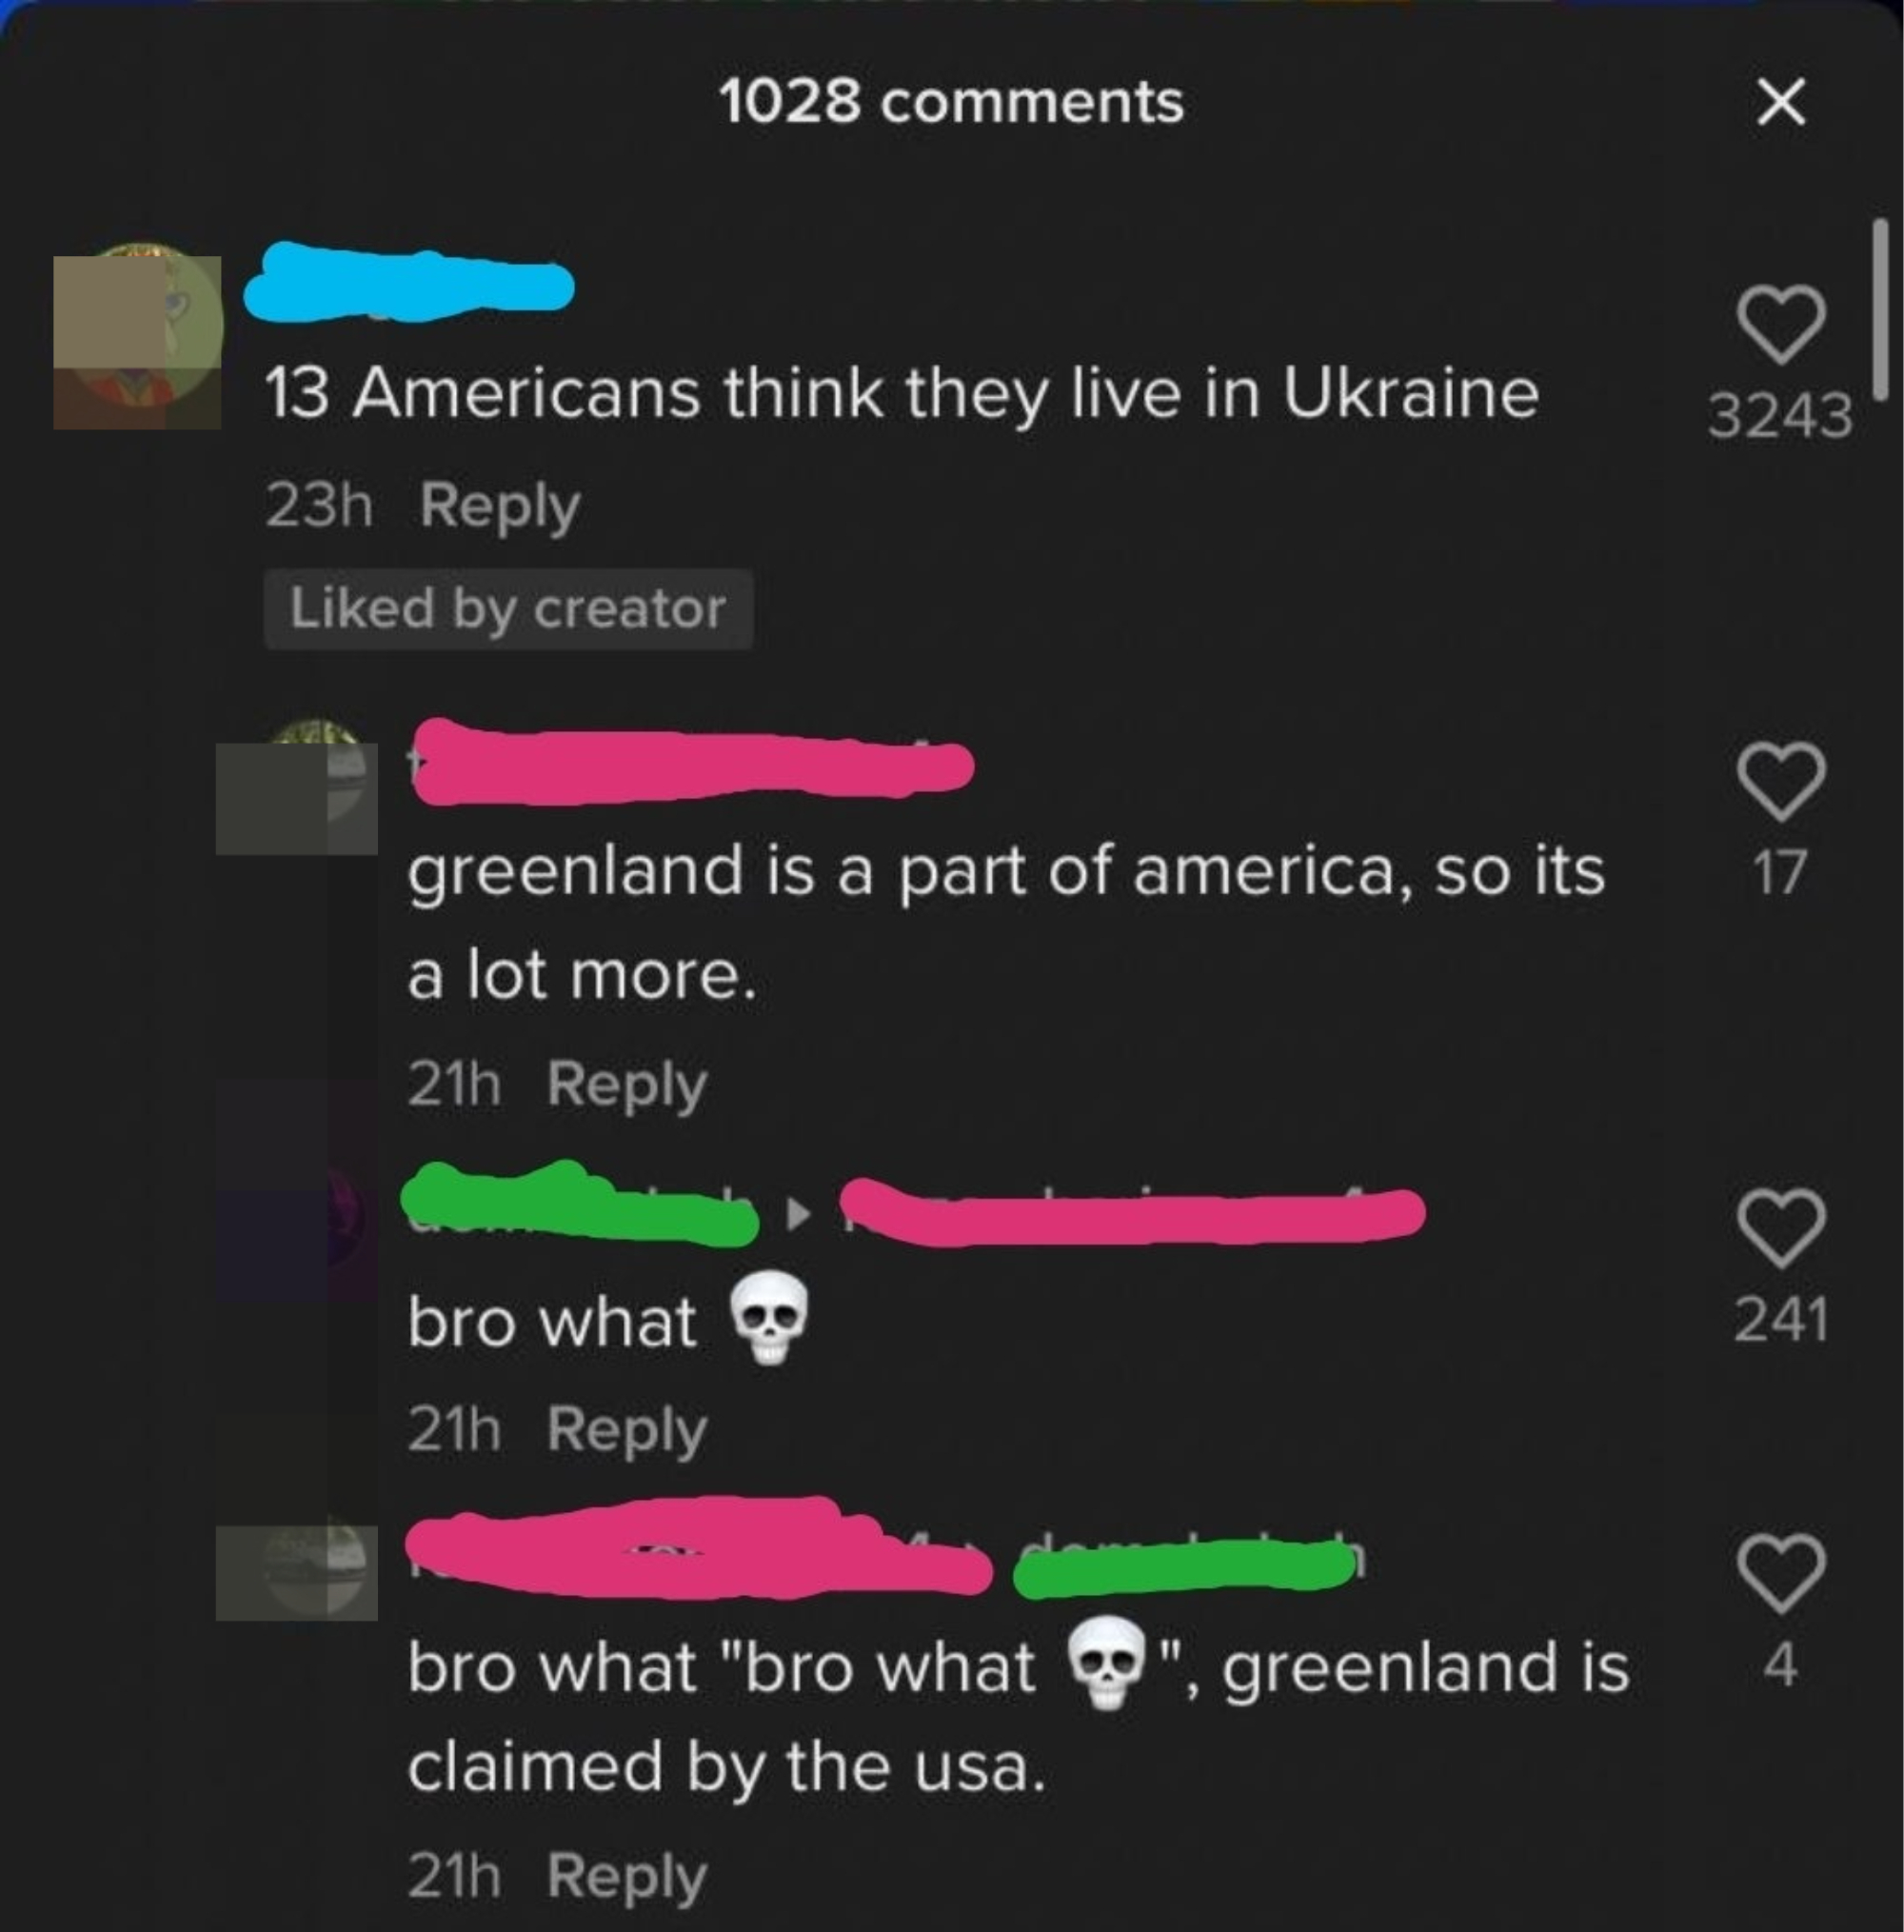 &quot;13 Americans think they live in Ukraine&quot; and &quot;Greenland is a part of America, so it&#x27;s a lot more,&quot; &quot;Bro what,&quot; and &quot;Bro what &#x27;bro what,&#x27; Greenland is claimed by the USA&quot;